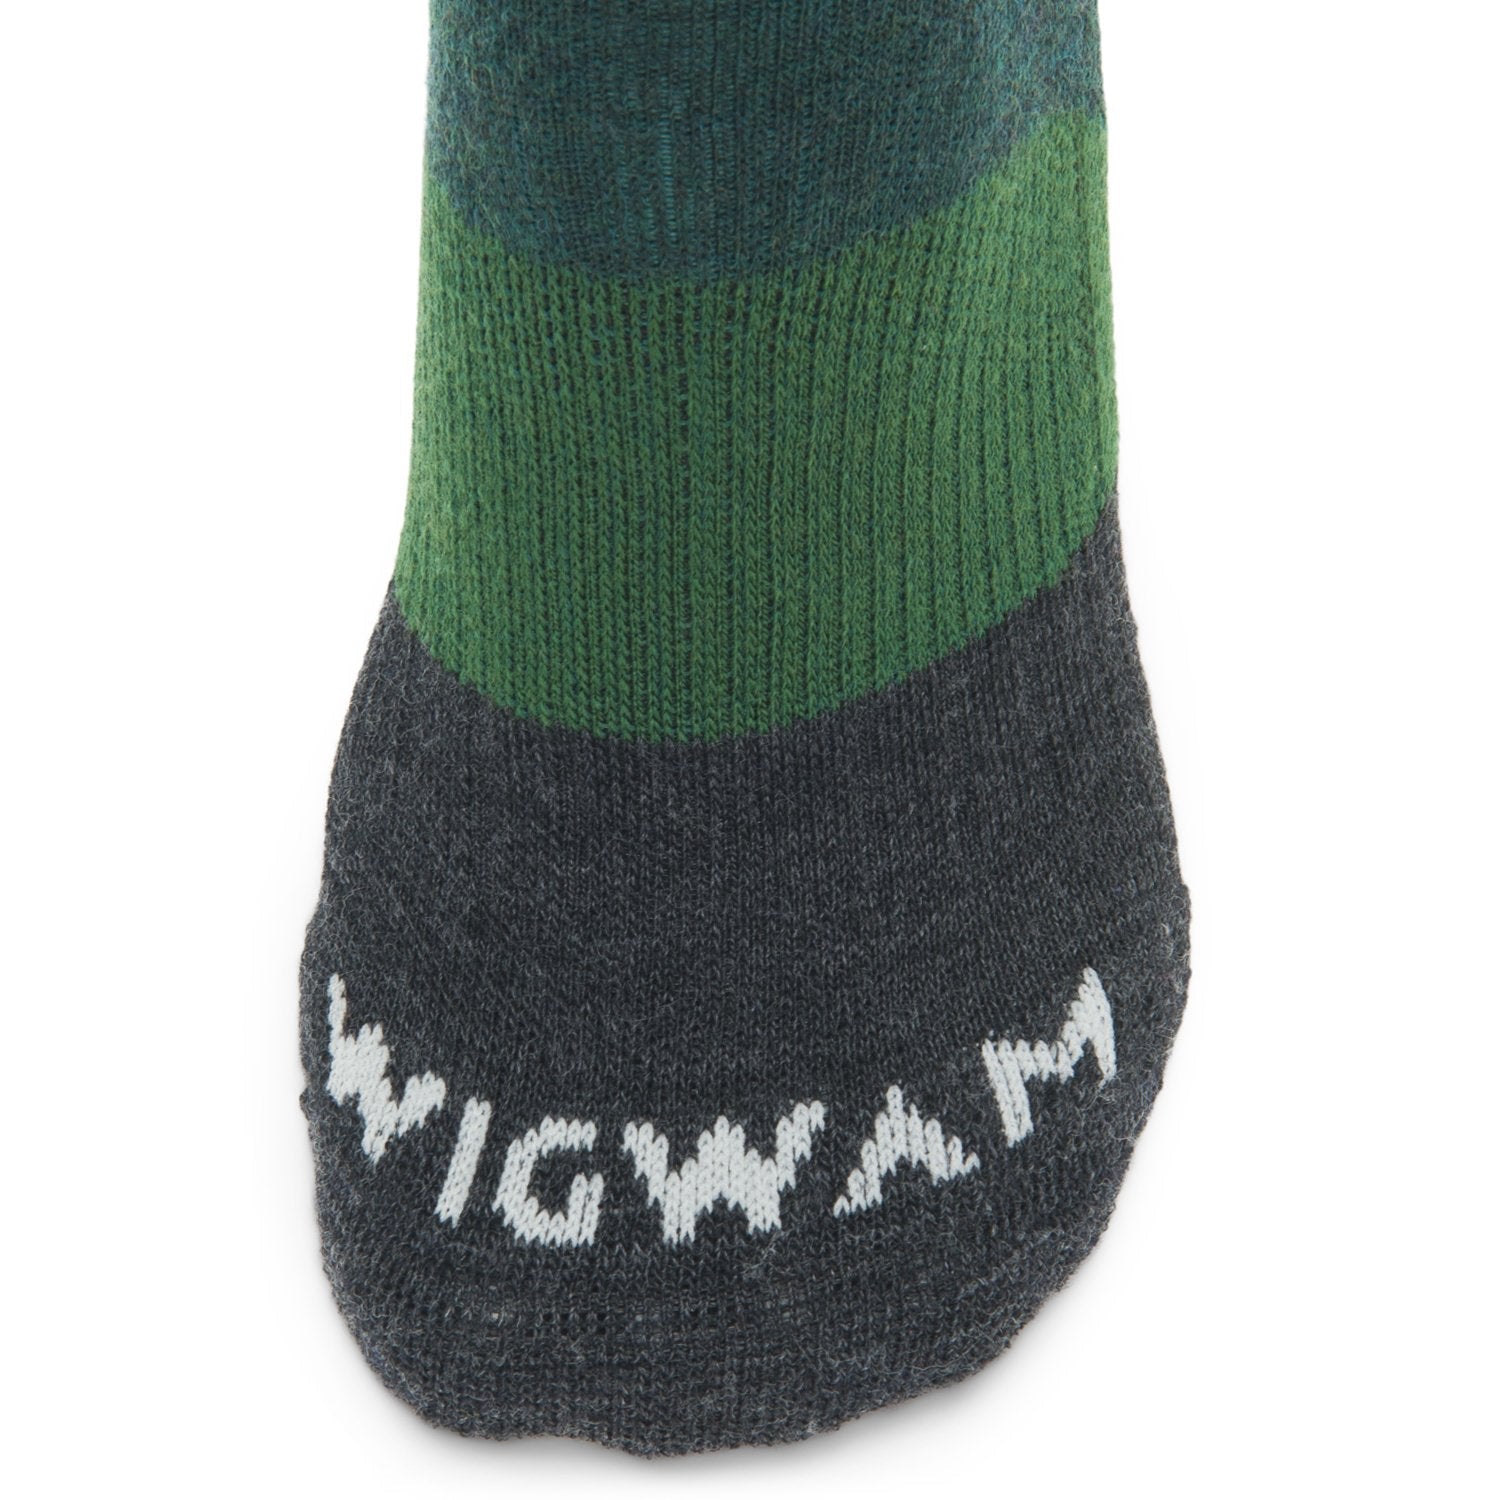 Trail Junkie Lightweight Mid Crew Sock With Merino Wool - June Bug toe perspective - made in The USA Wigwam Socks